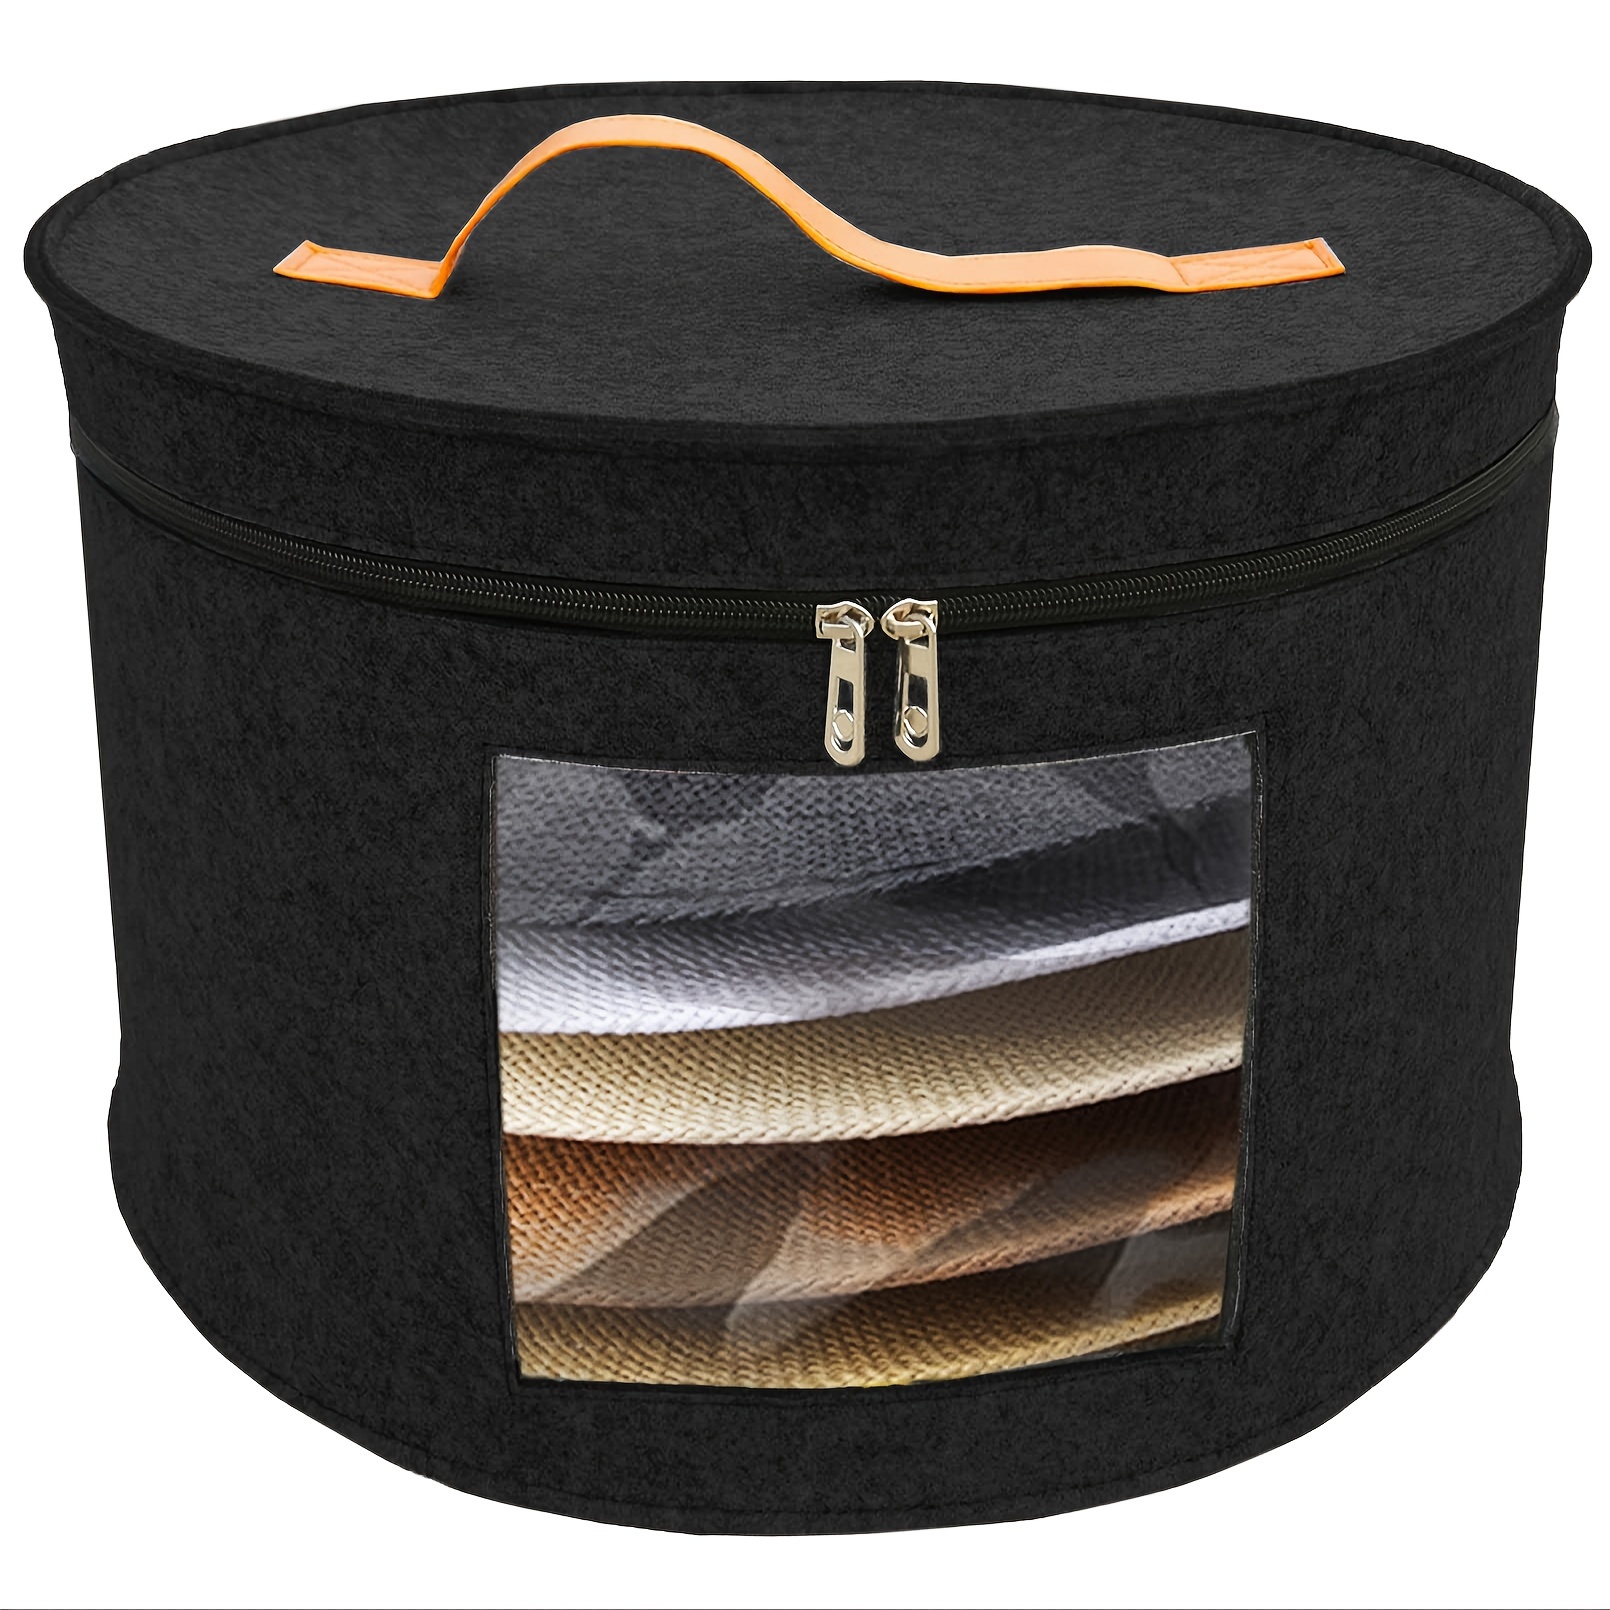 

Hat Storage Box, Portable Felt Organizer, Large Capacity Round Travel Hat Container With Dustproof Lid, Toys & Clothes Storage Bag